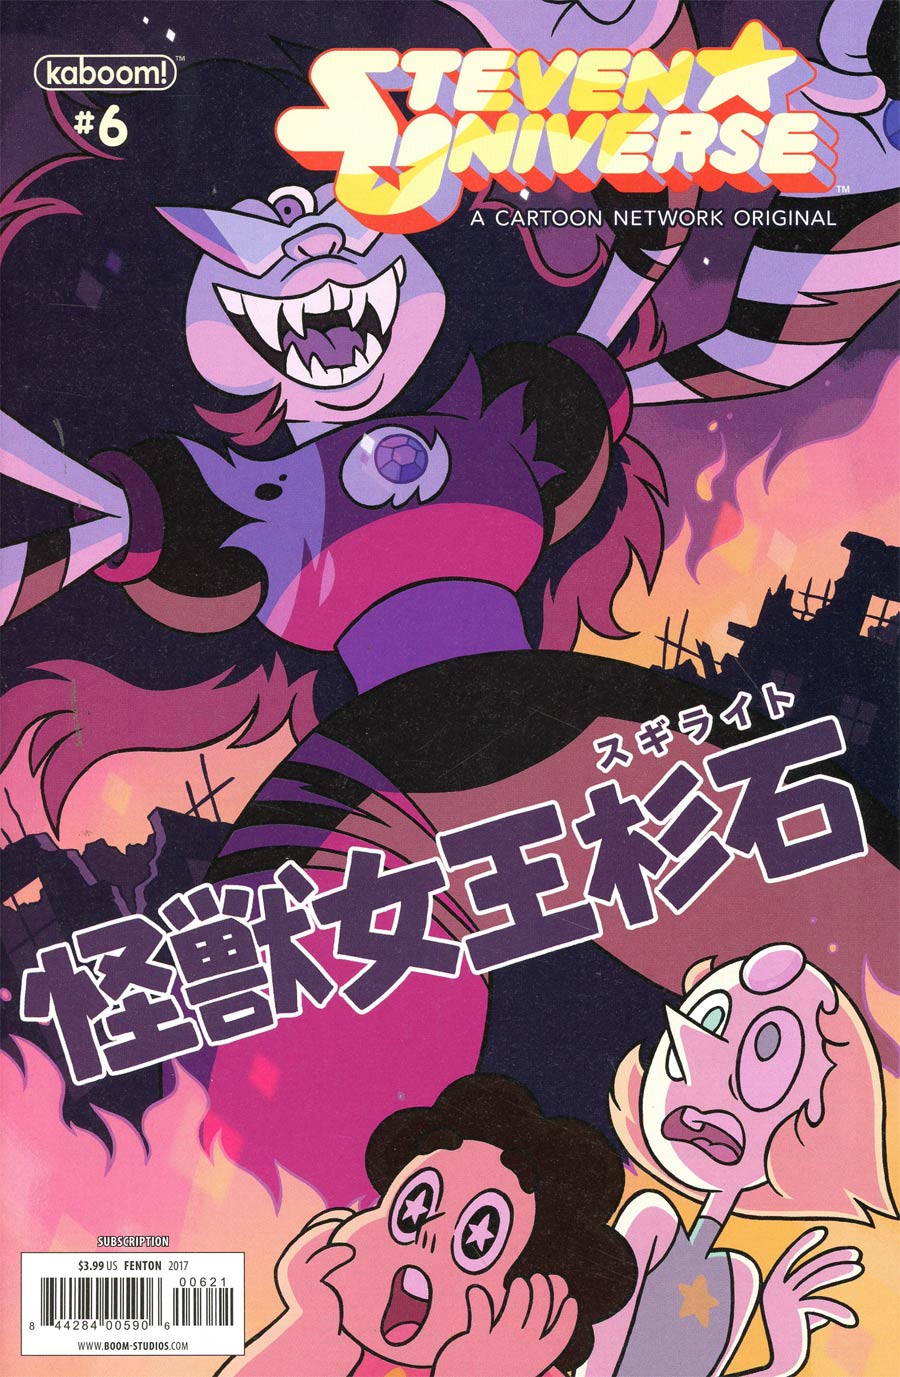 Steven Universe Vol 2 #6 Cover B Variant Rian Sygh Subscription Cover